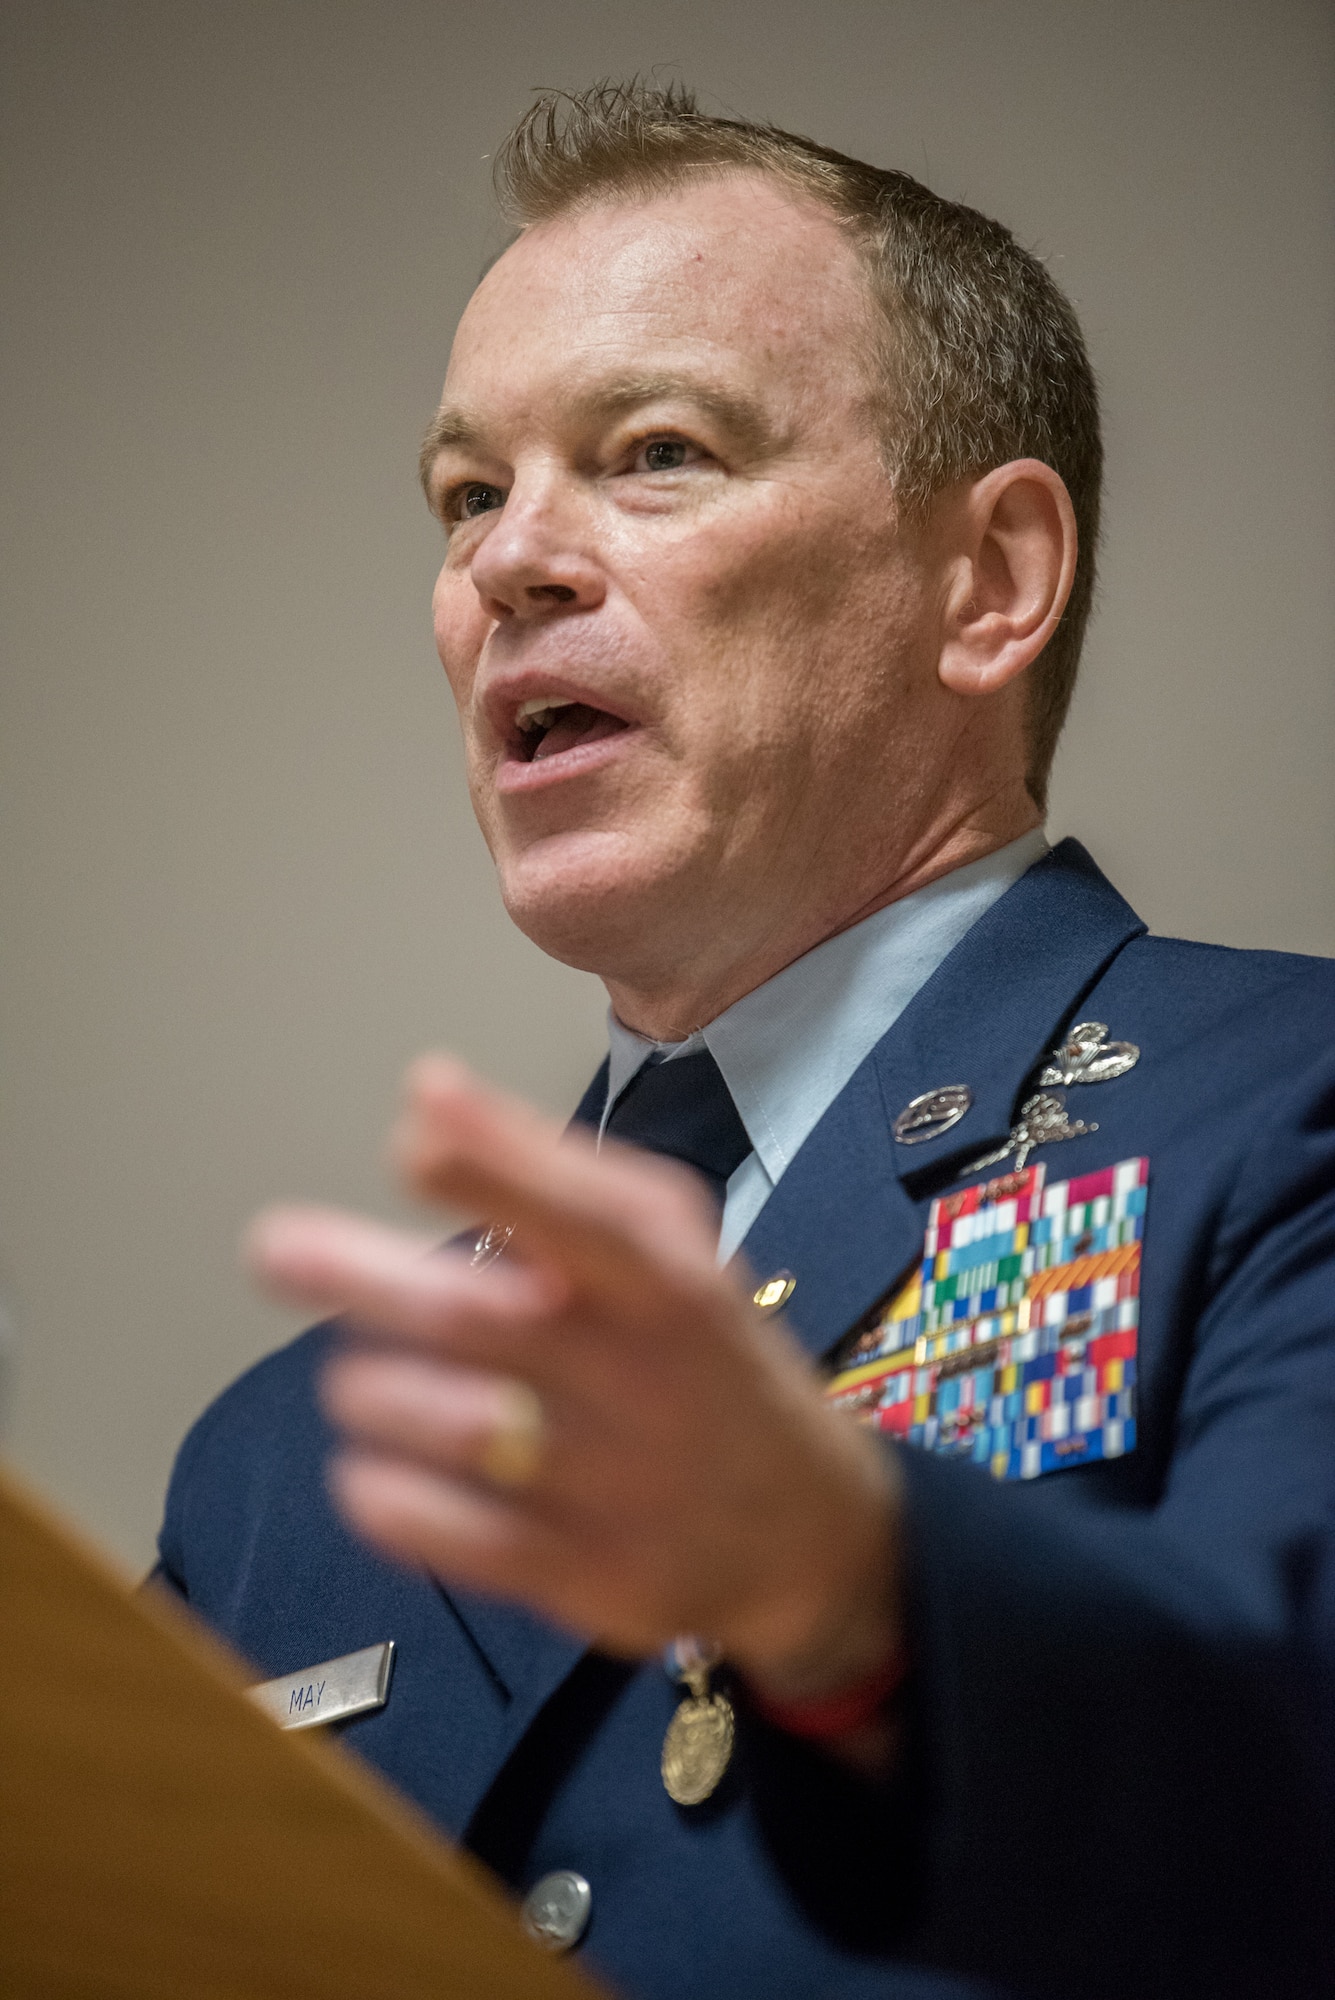 Chief Master Sgt. Aaron May, the outgoing chief enlisted manager for the 123rd Special Tactics Squadron, speaks at his retirement ceremony at the Kentucky Air National Guard Base in Louisville, Ky., on Dec 7, 2019. May is retiring after more than 26 years of service to the Kentucky Air National Guard and U.S. Air Force. (U.S. Air National Guard photo by Staff Sgt. Joshua Horton)